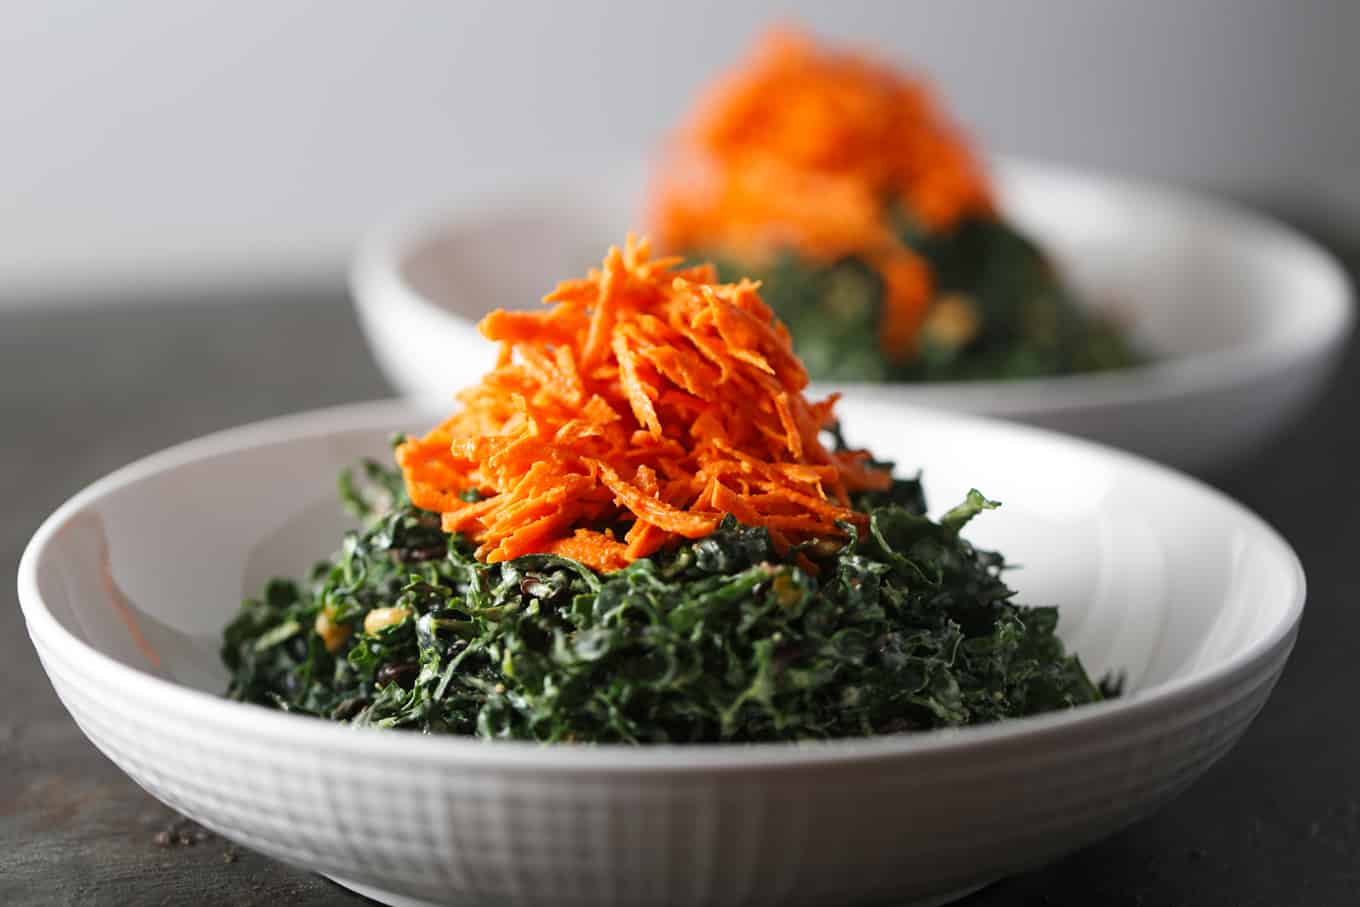 Kale and Carrot Salad